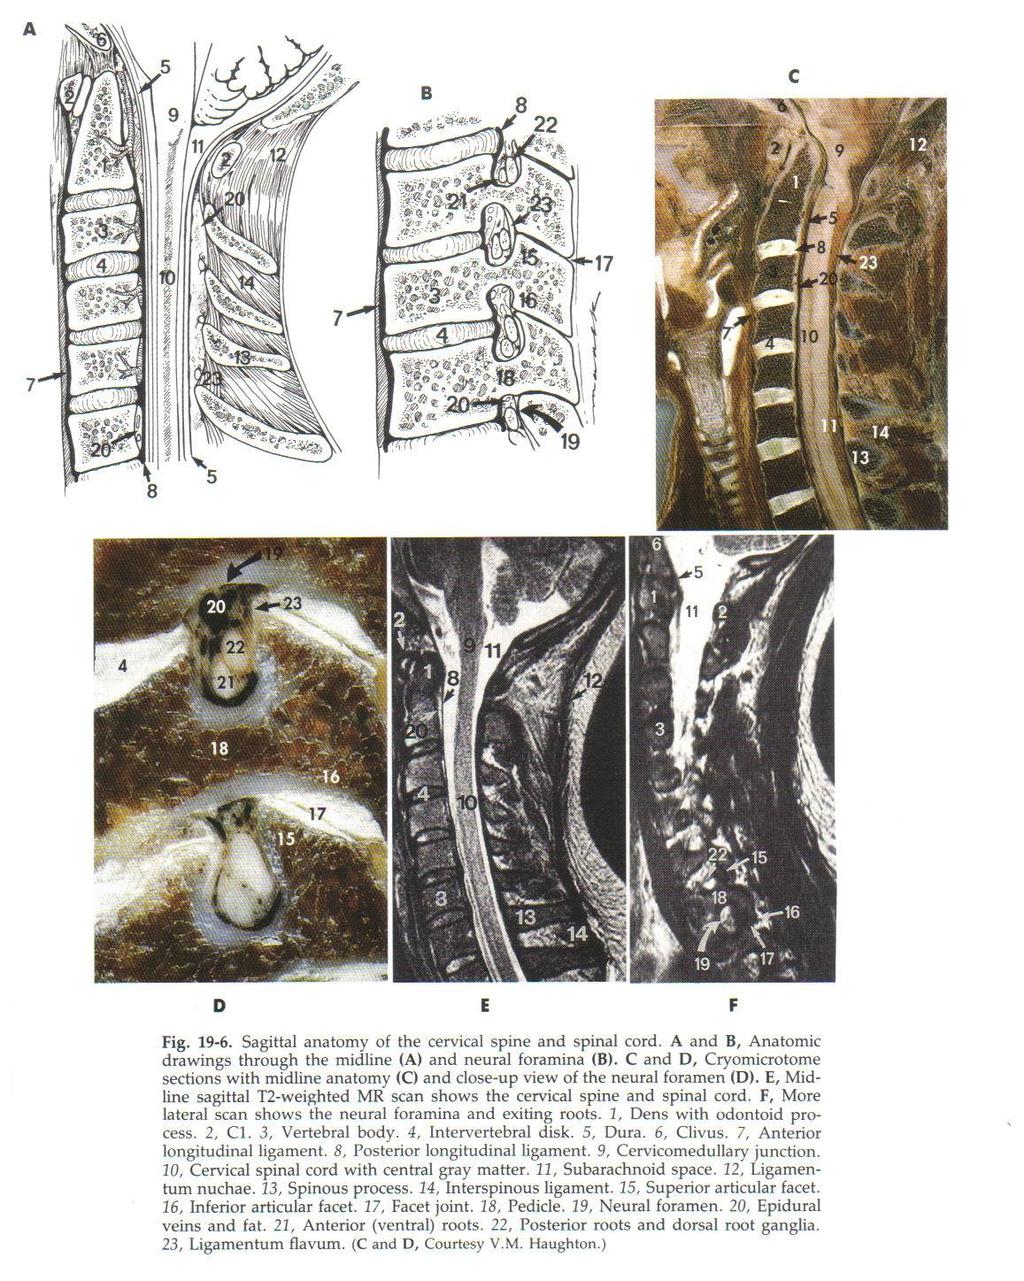 Spine Anatomy and MR Saggital View